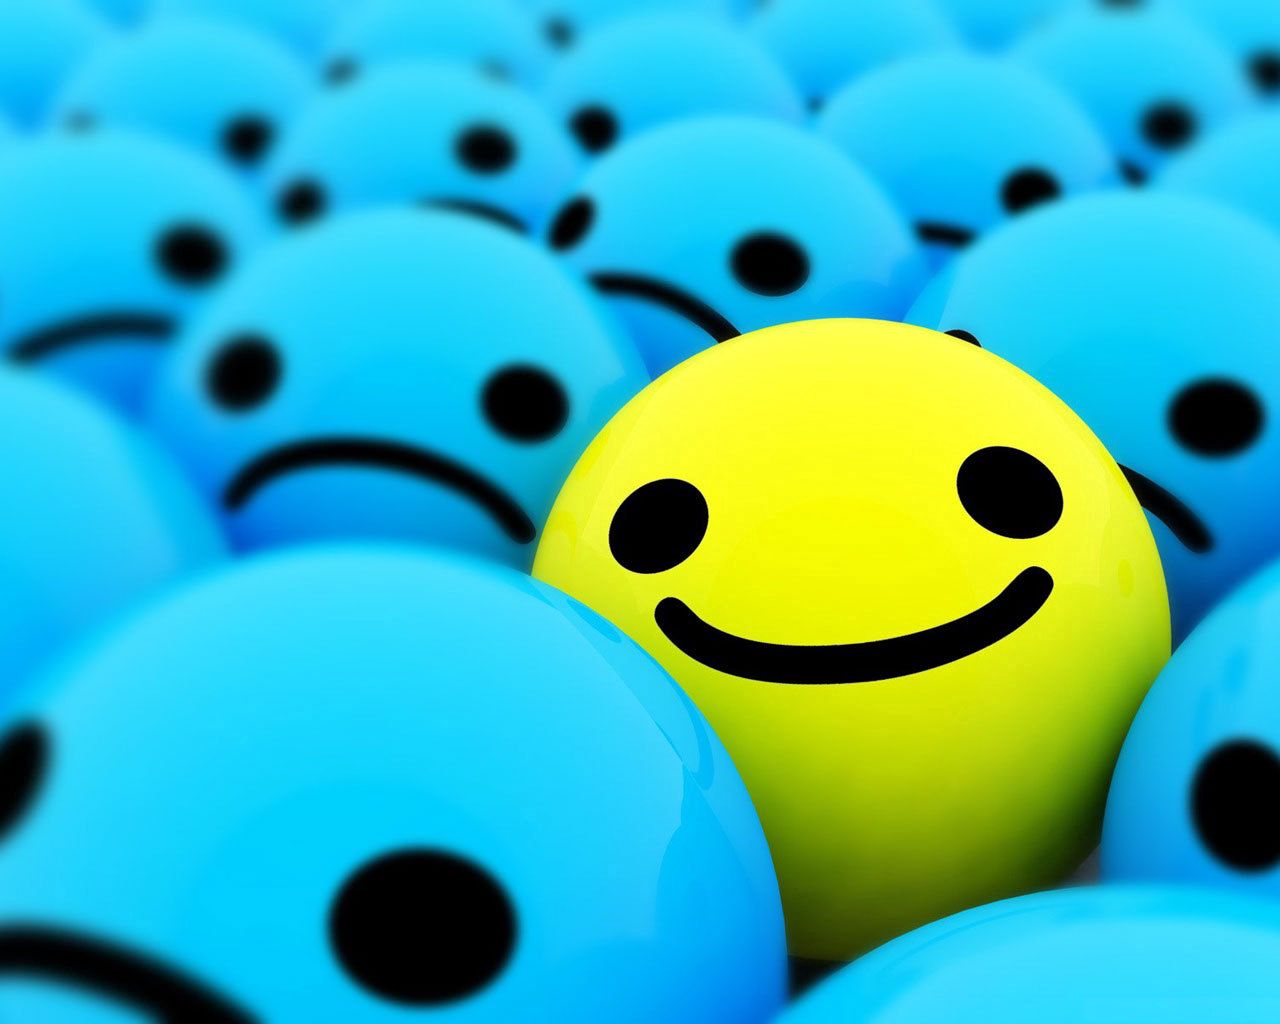 bright, yellow, smile, abstract, blue cell phone wallpapers